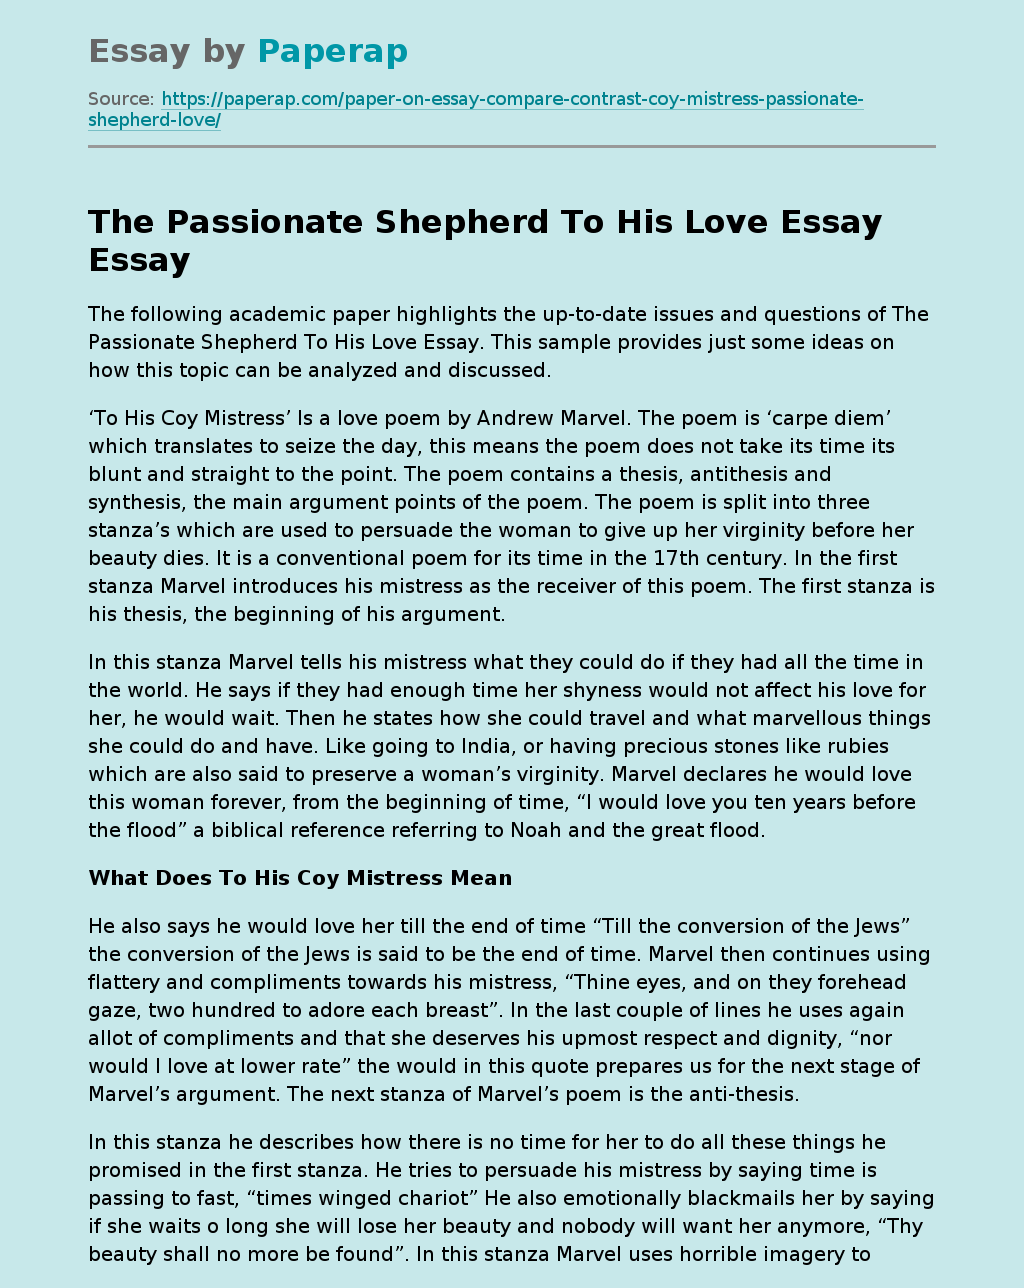 The Passionate Shepherd To His Love Essay